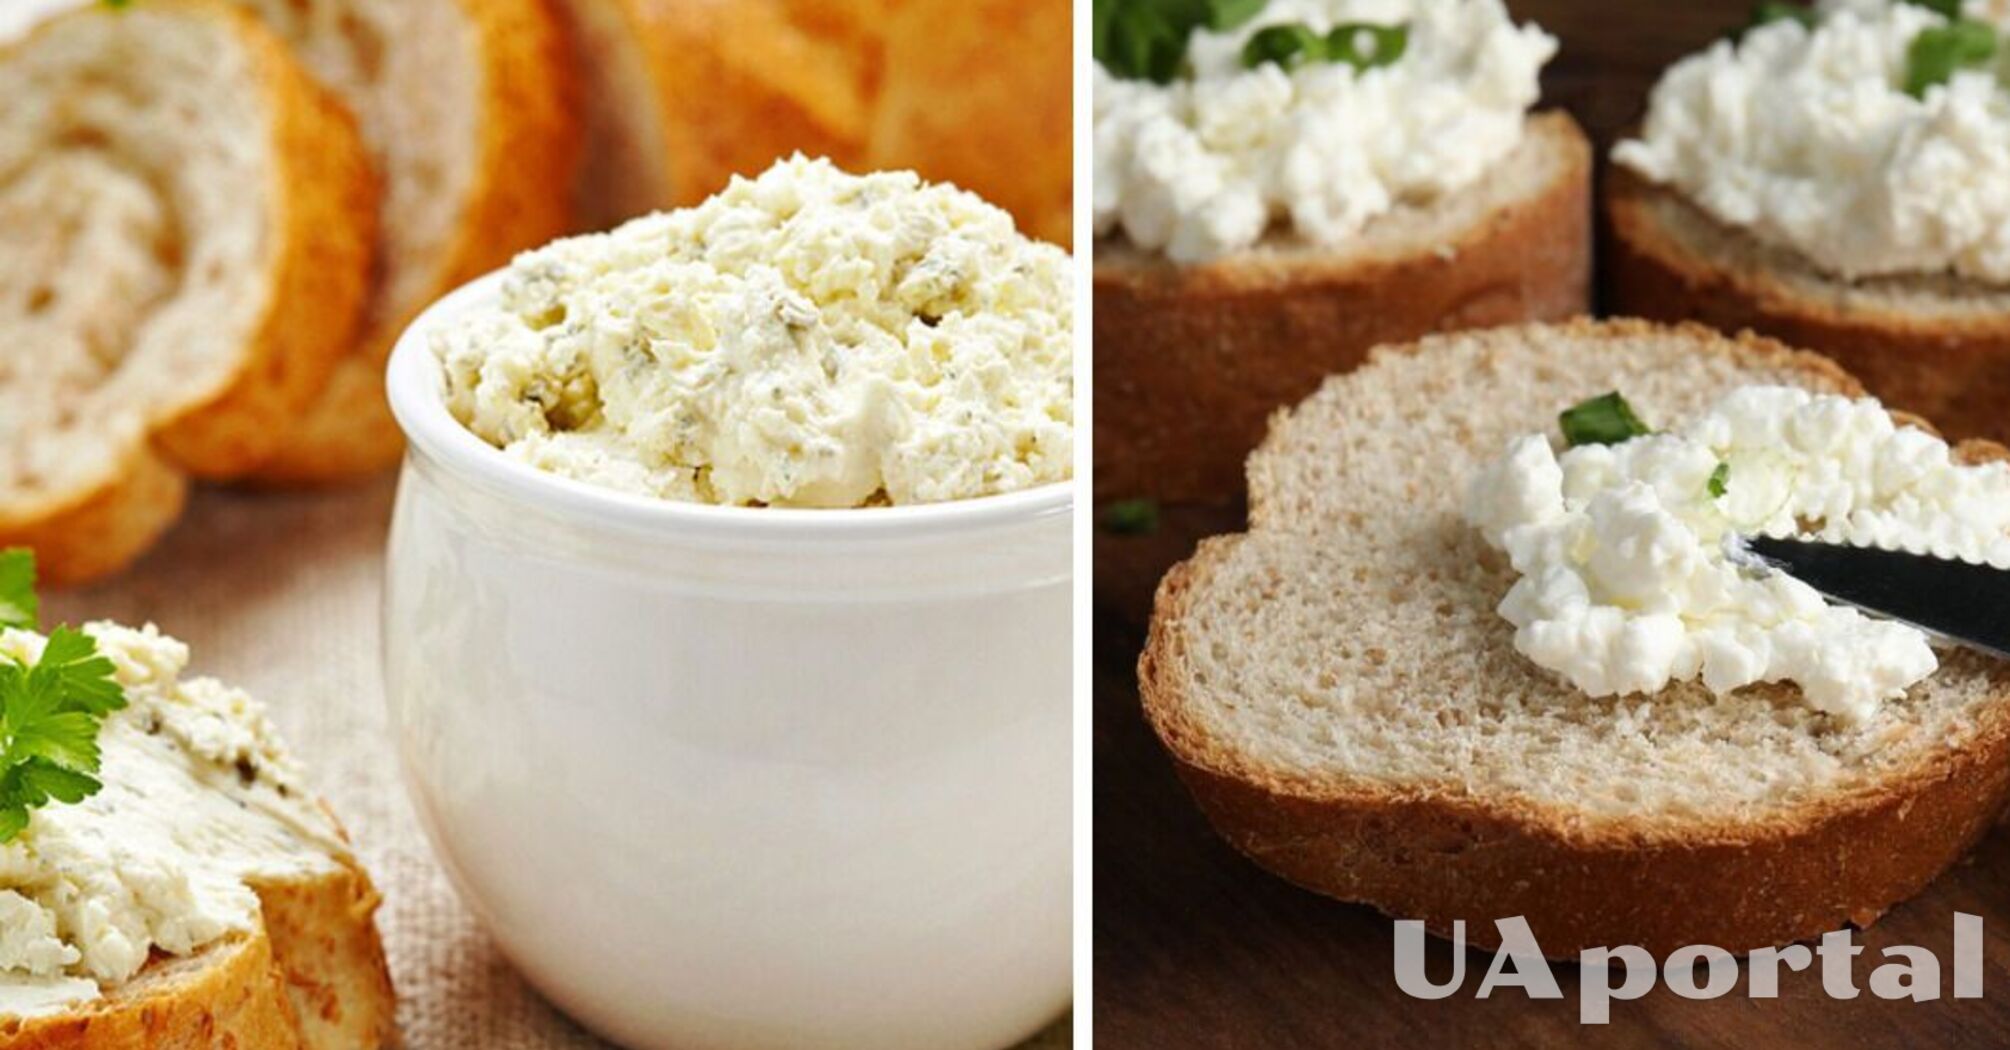 Quick and healthy snack: a recipe for cheese spread with herbs in 5 minutes